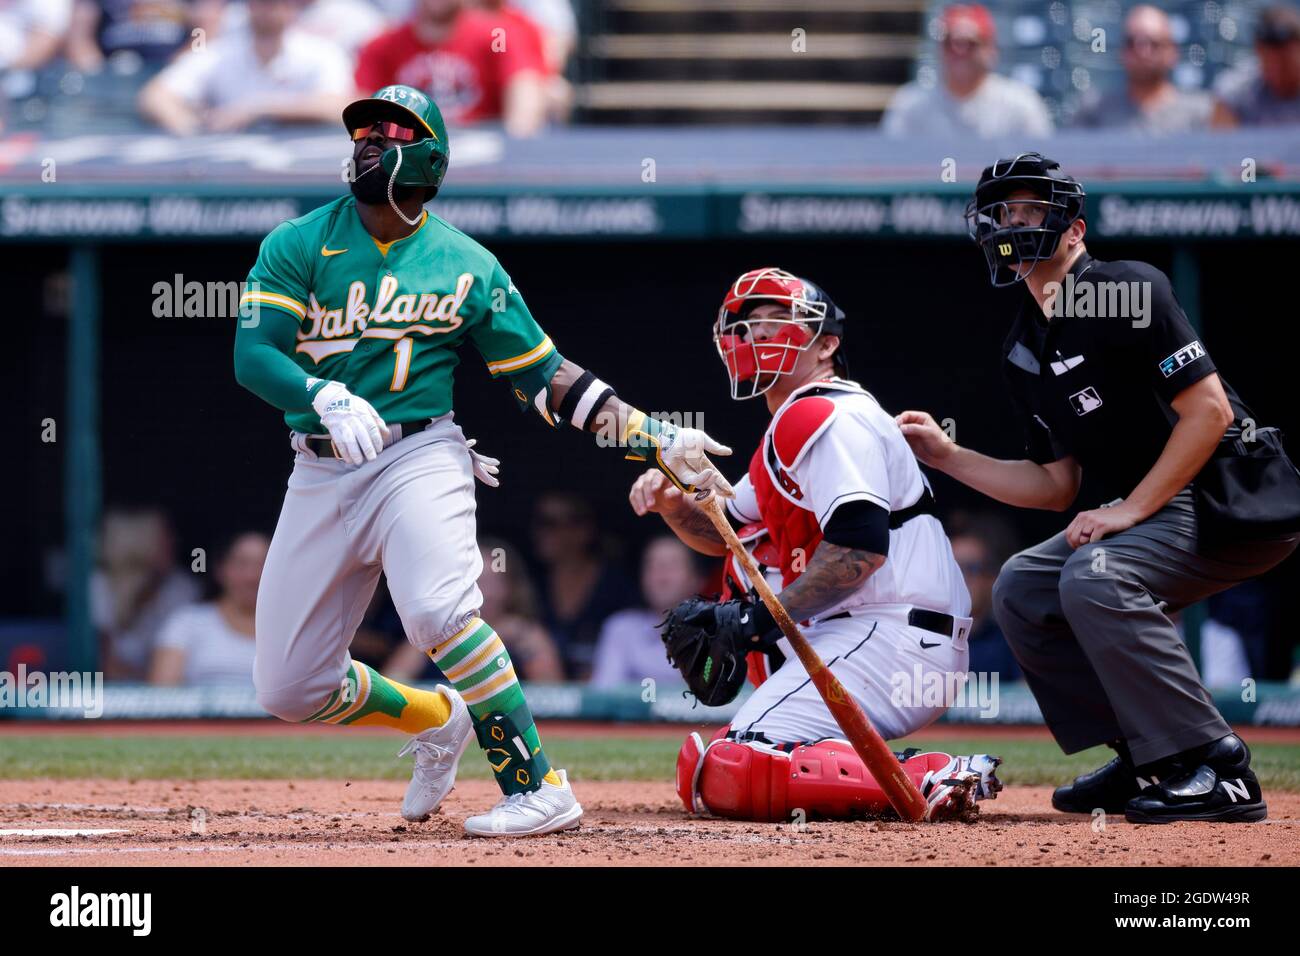 CLEVELAND, OH - AUGUST 12: Josh Harrison (1) of the Oakland A's bats during a game against the Cleveland Indians at Progressive Field on August 12, 20 Stock Photo